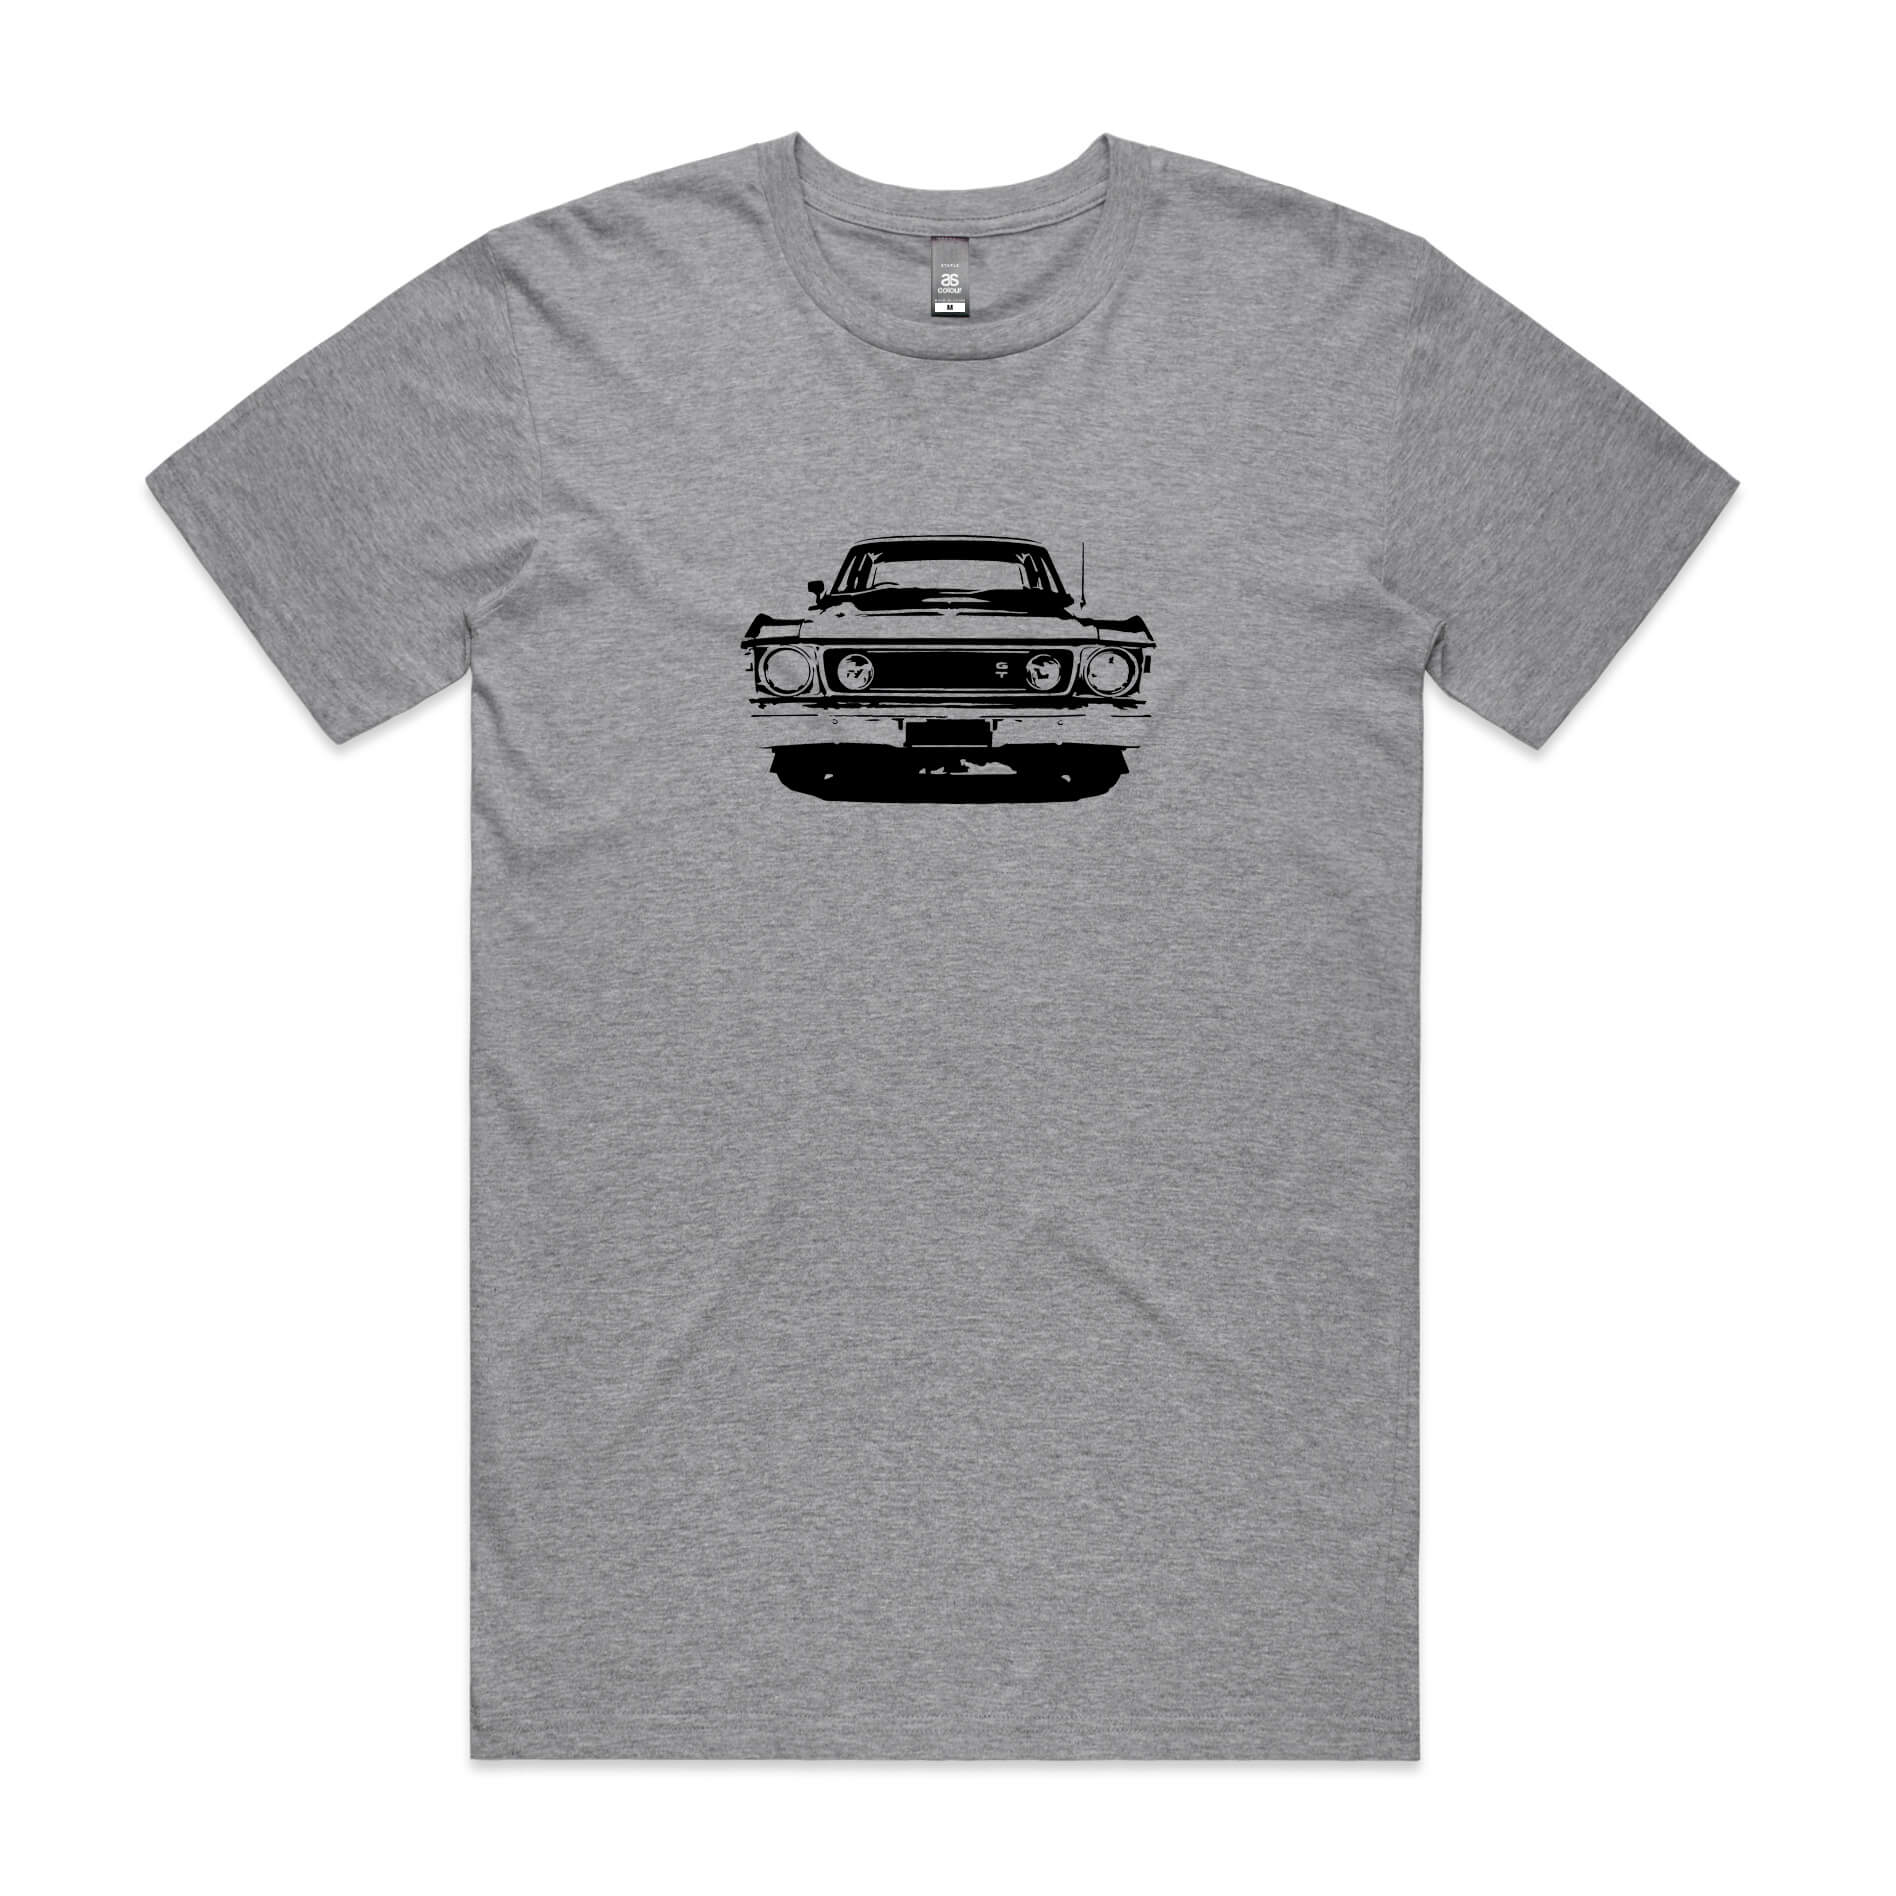 Ford XW Falcon t-shirt in grey with black GT car graphic